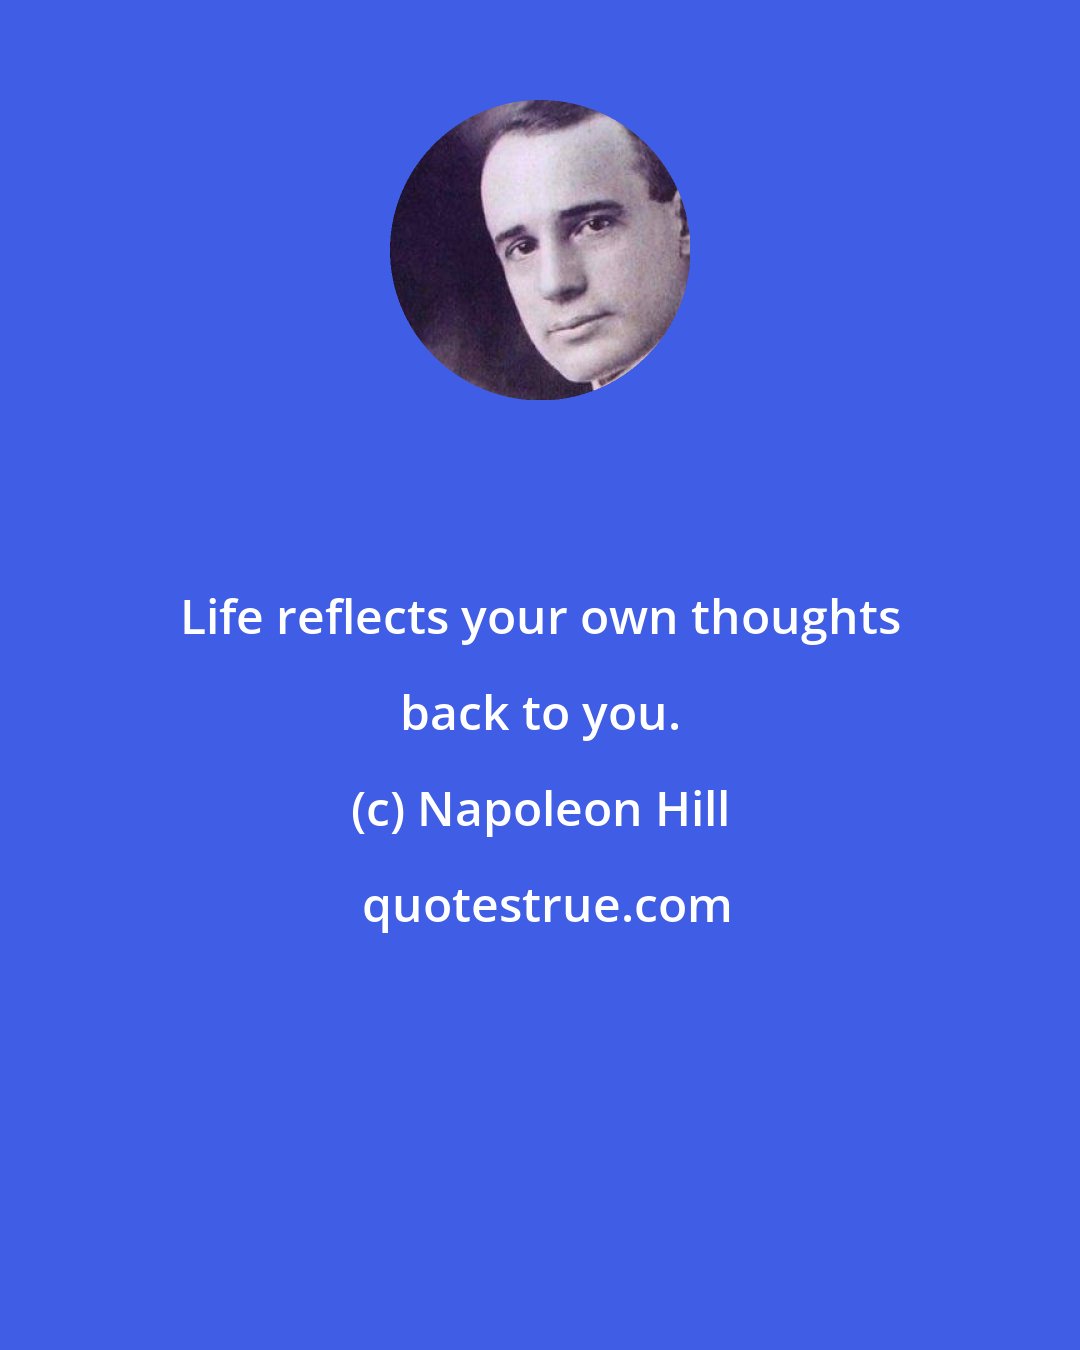 Napoleon Hill: Life reflects your own thoughts back to you.